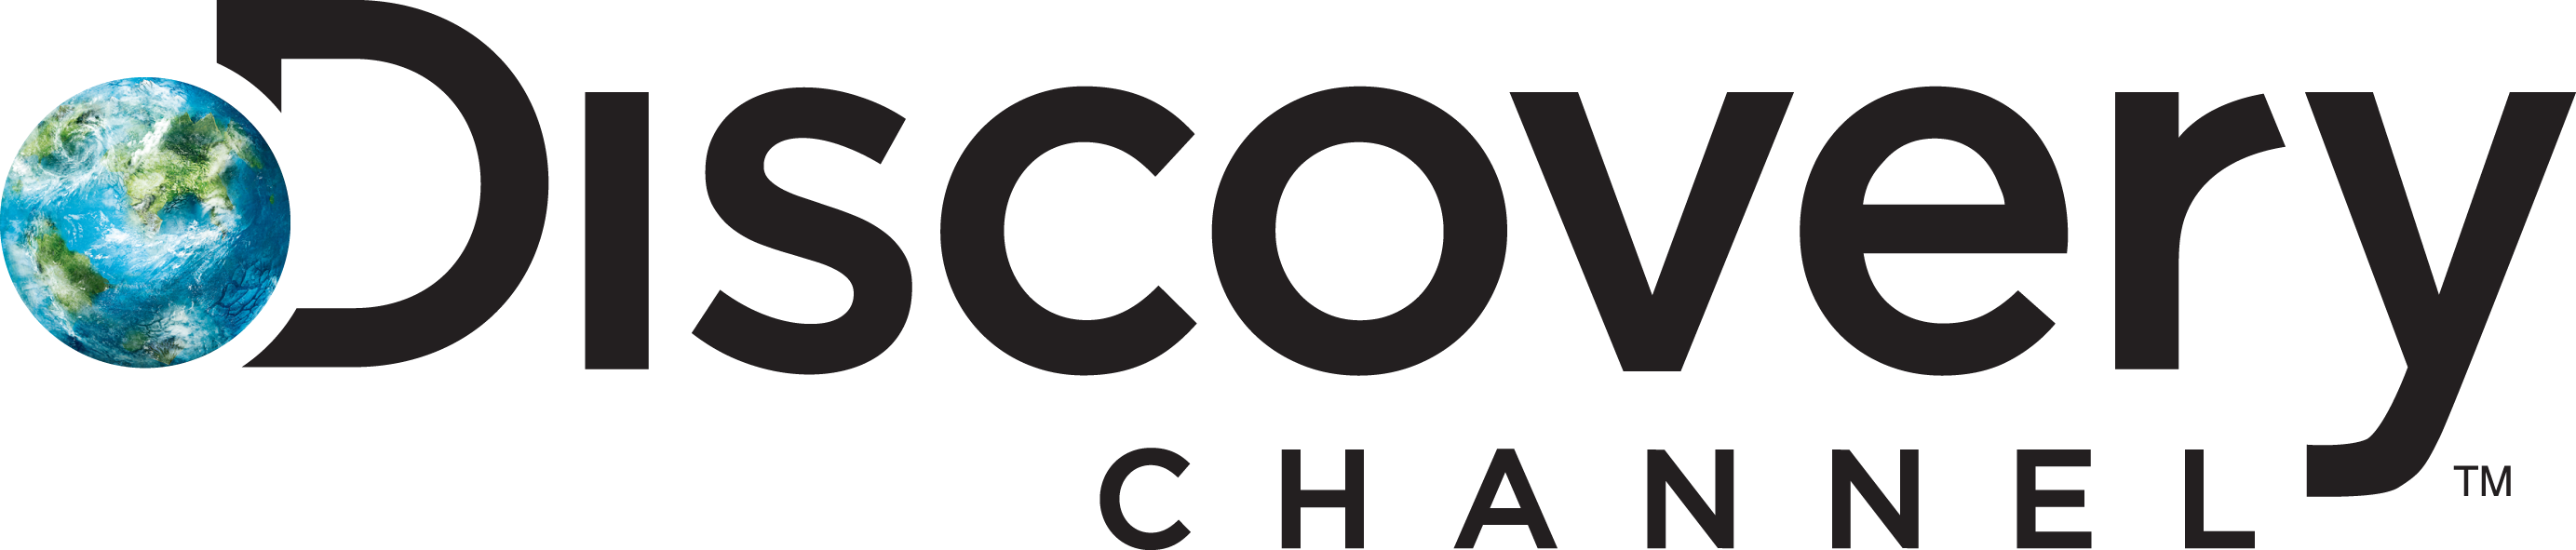 Discovery_Channel_logo_2009